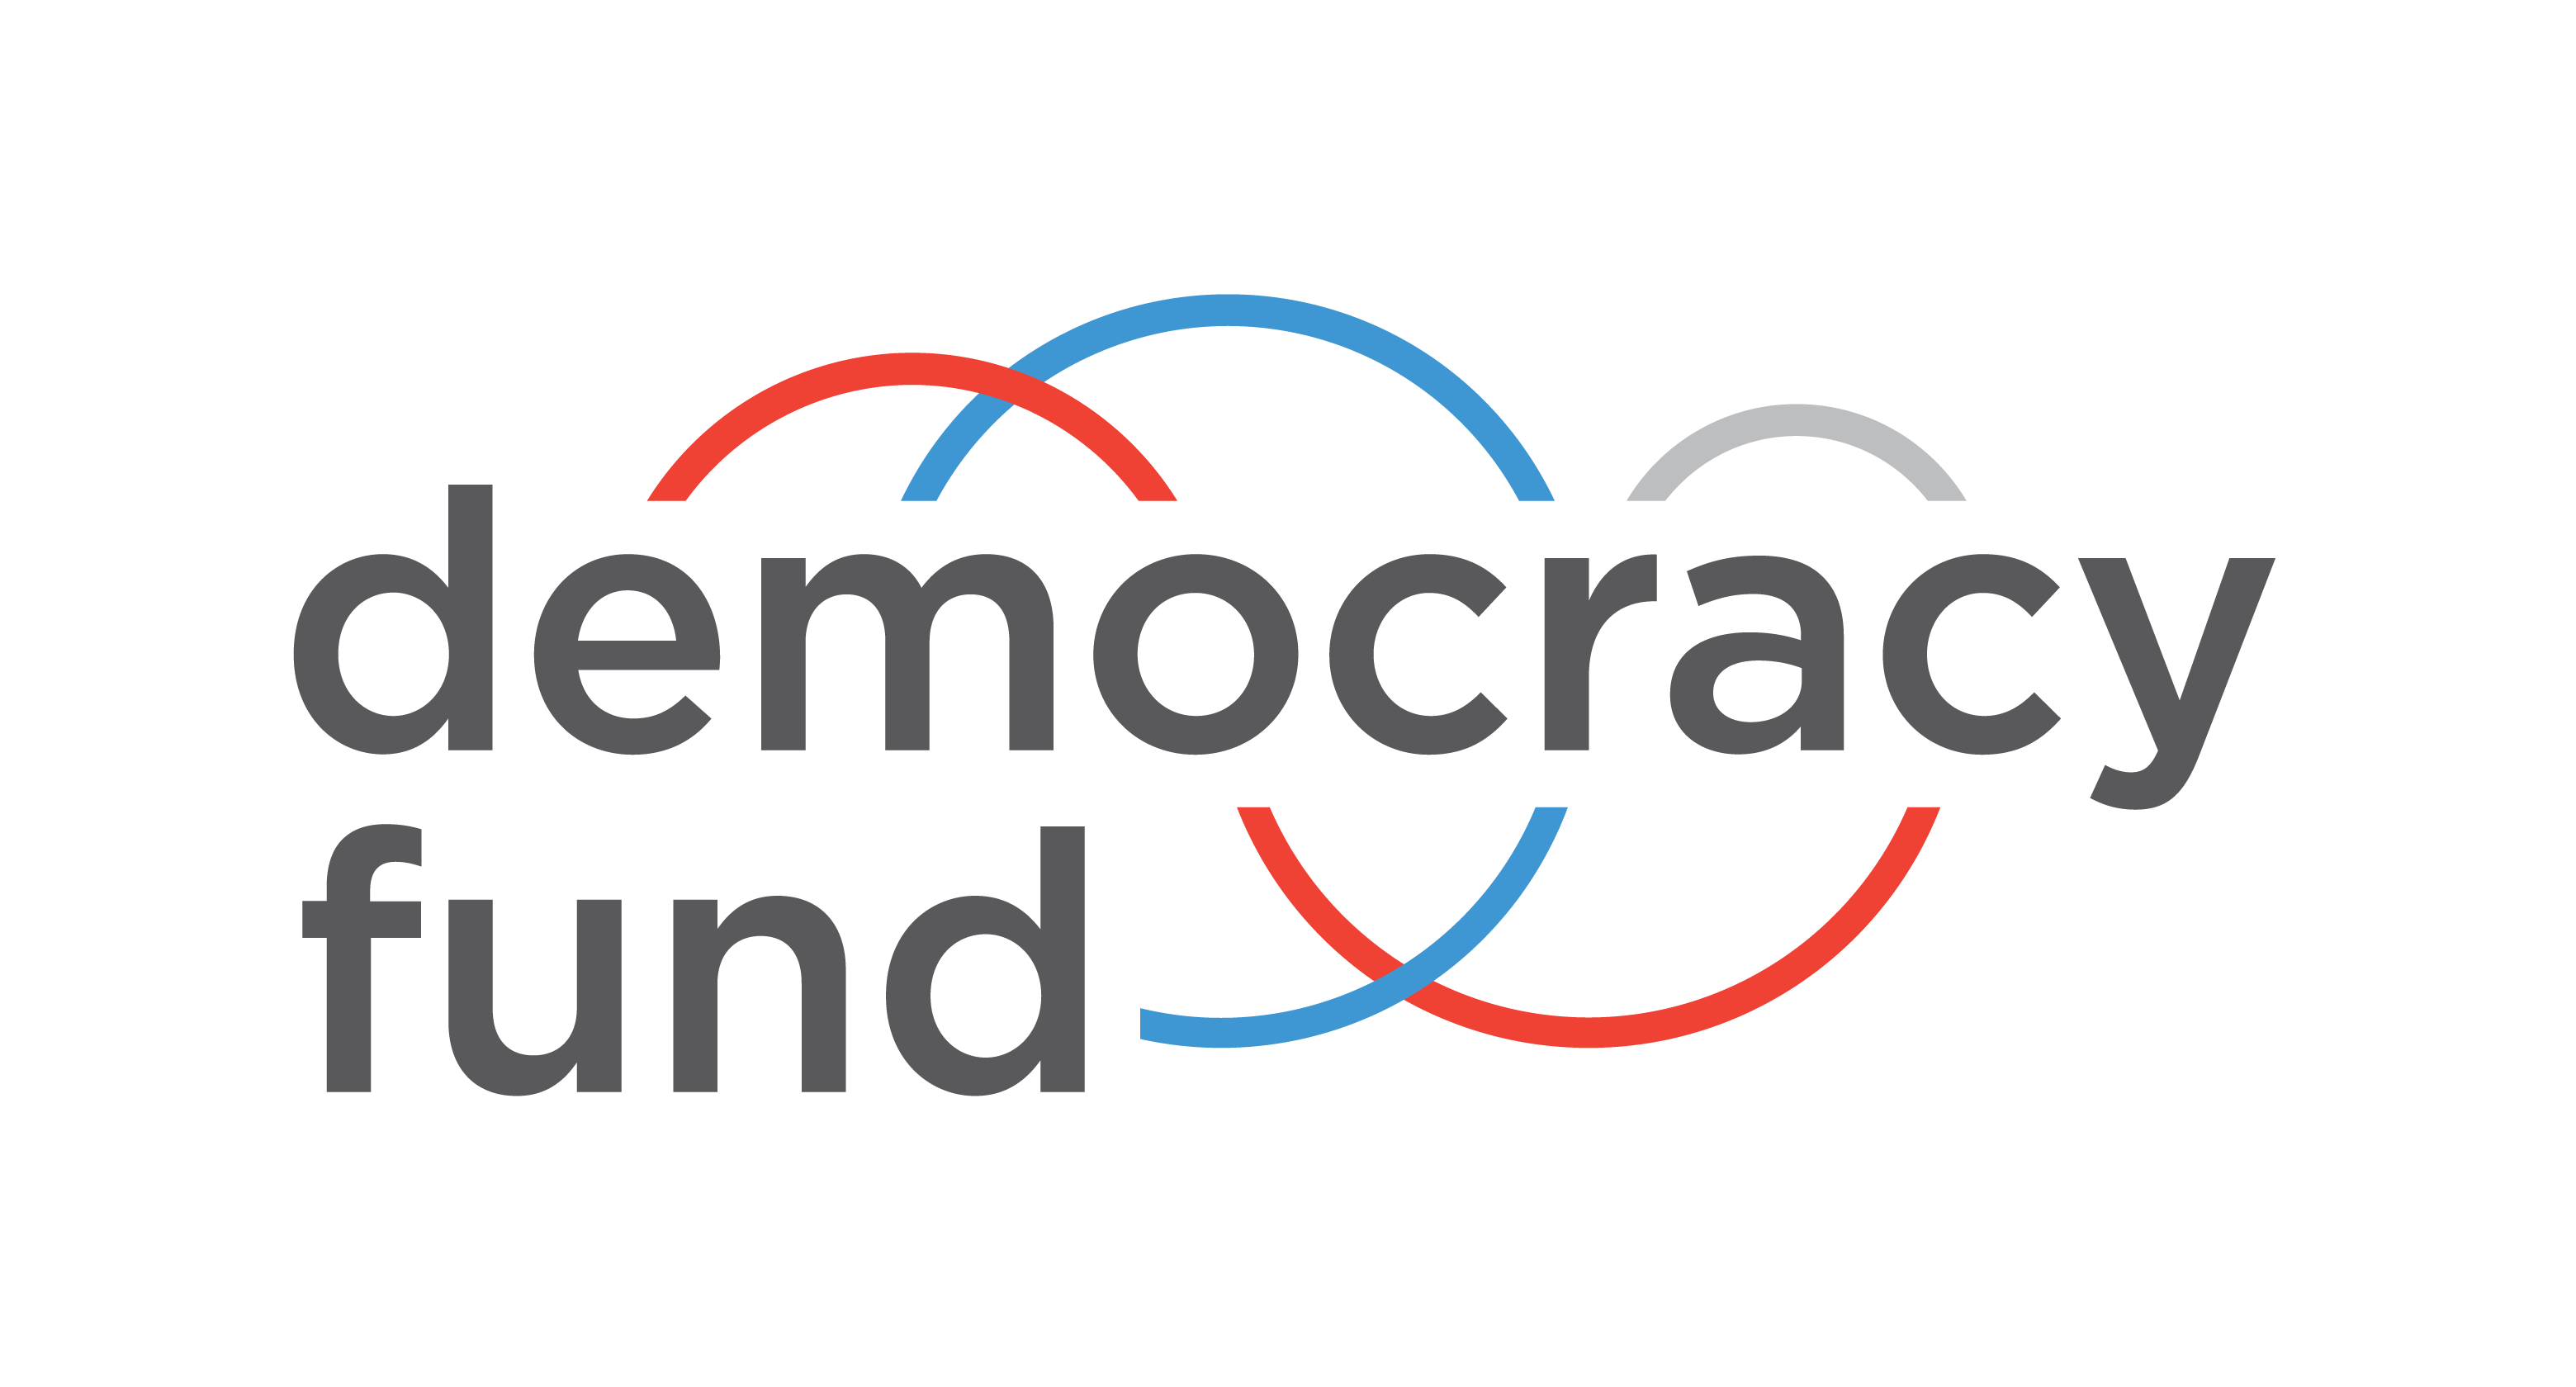 democracy fund text with red, blue and white squiggles around it